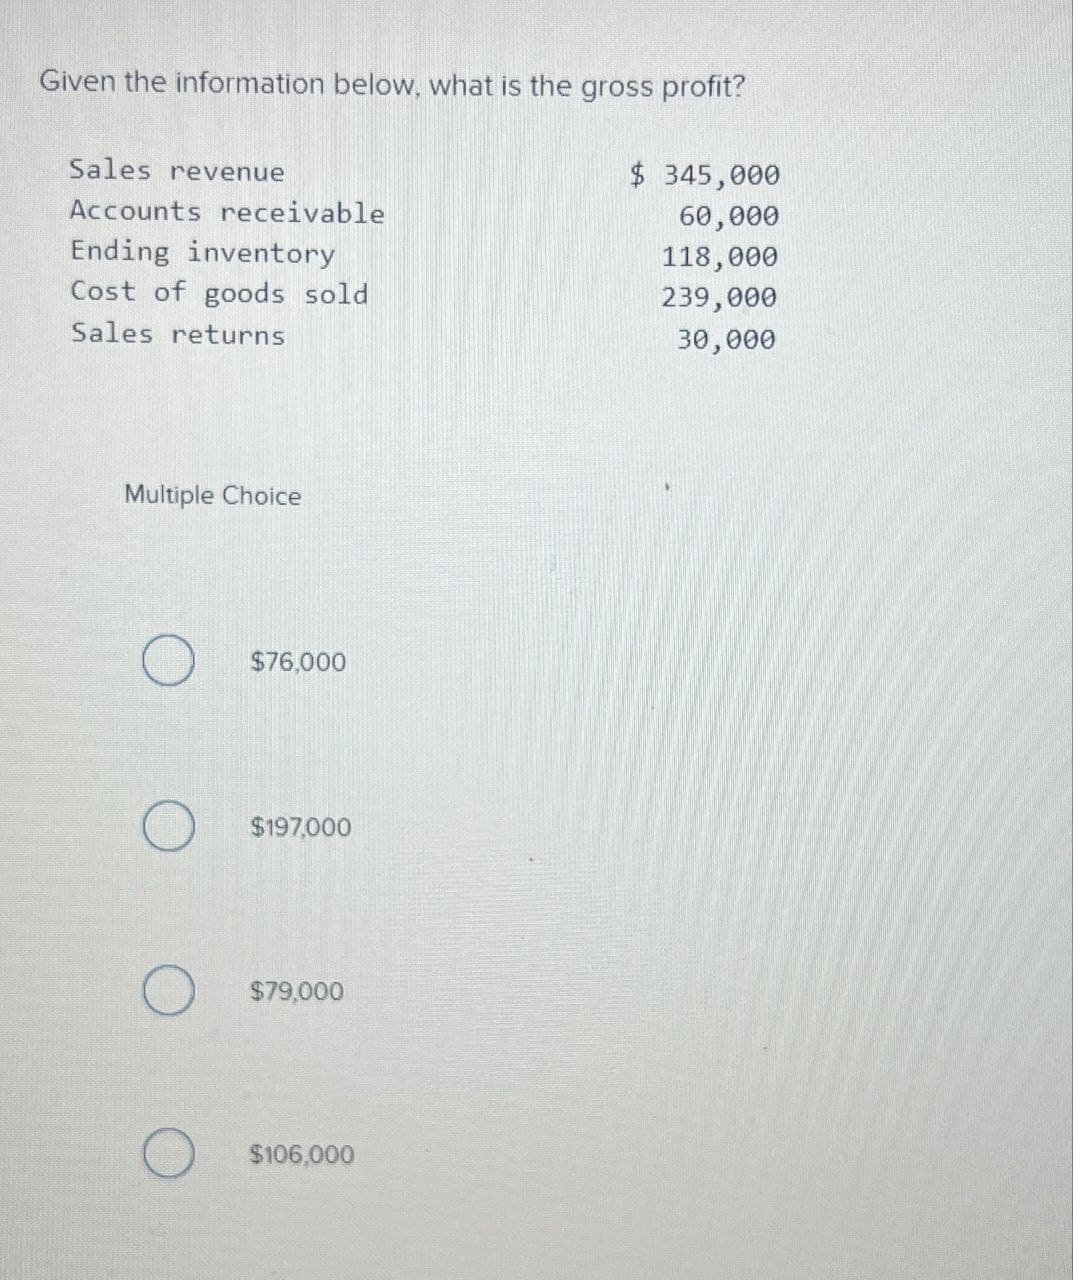 Given the information below, what is the gross profit?
Sales revenue
Accounts receivable
Ending inventory
Cost of goods sold
Sales returns
Multiple Choice
$76,000
$197,000
$79,000
$106,000
$ 345,000
60,000
118,000
239,000
30,000